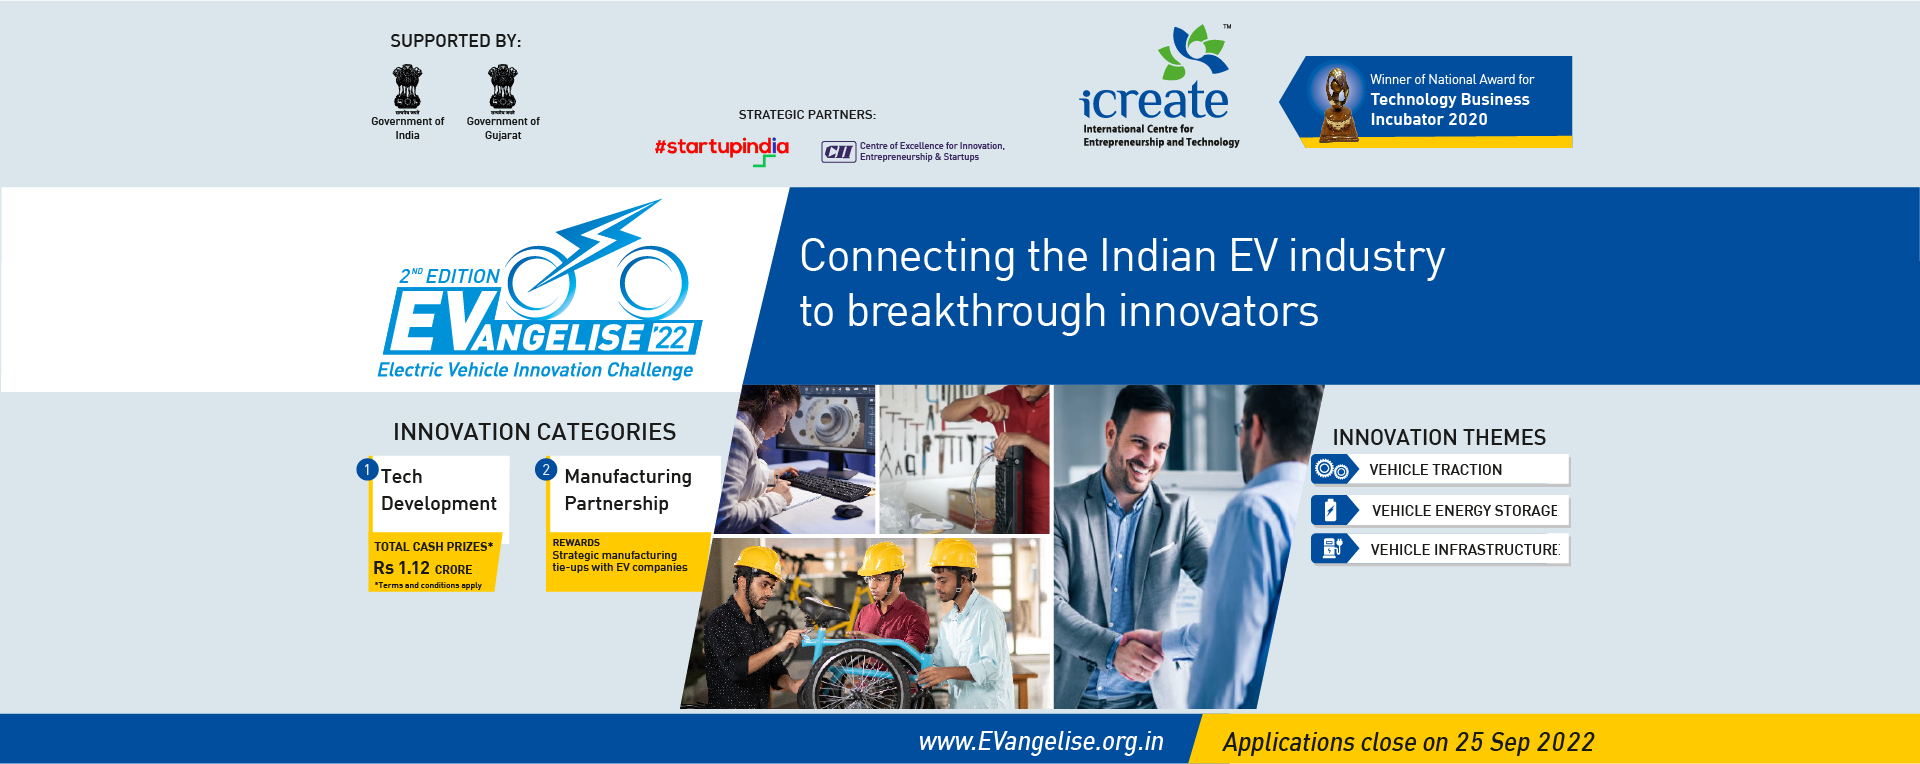 iCreate-Best-Incubator-in-India-Home-Page-Banner-EVangelise-22